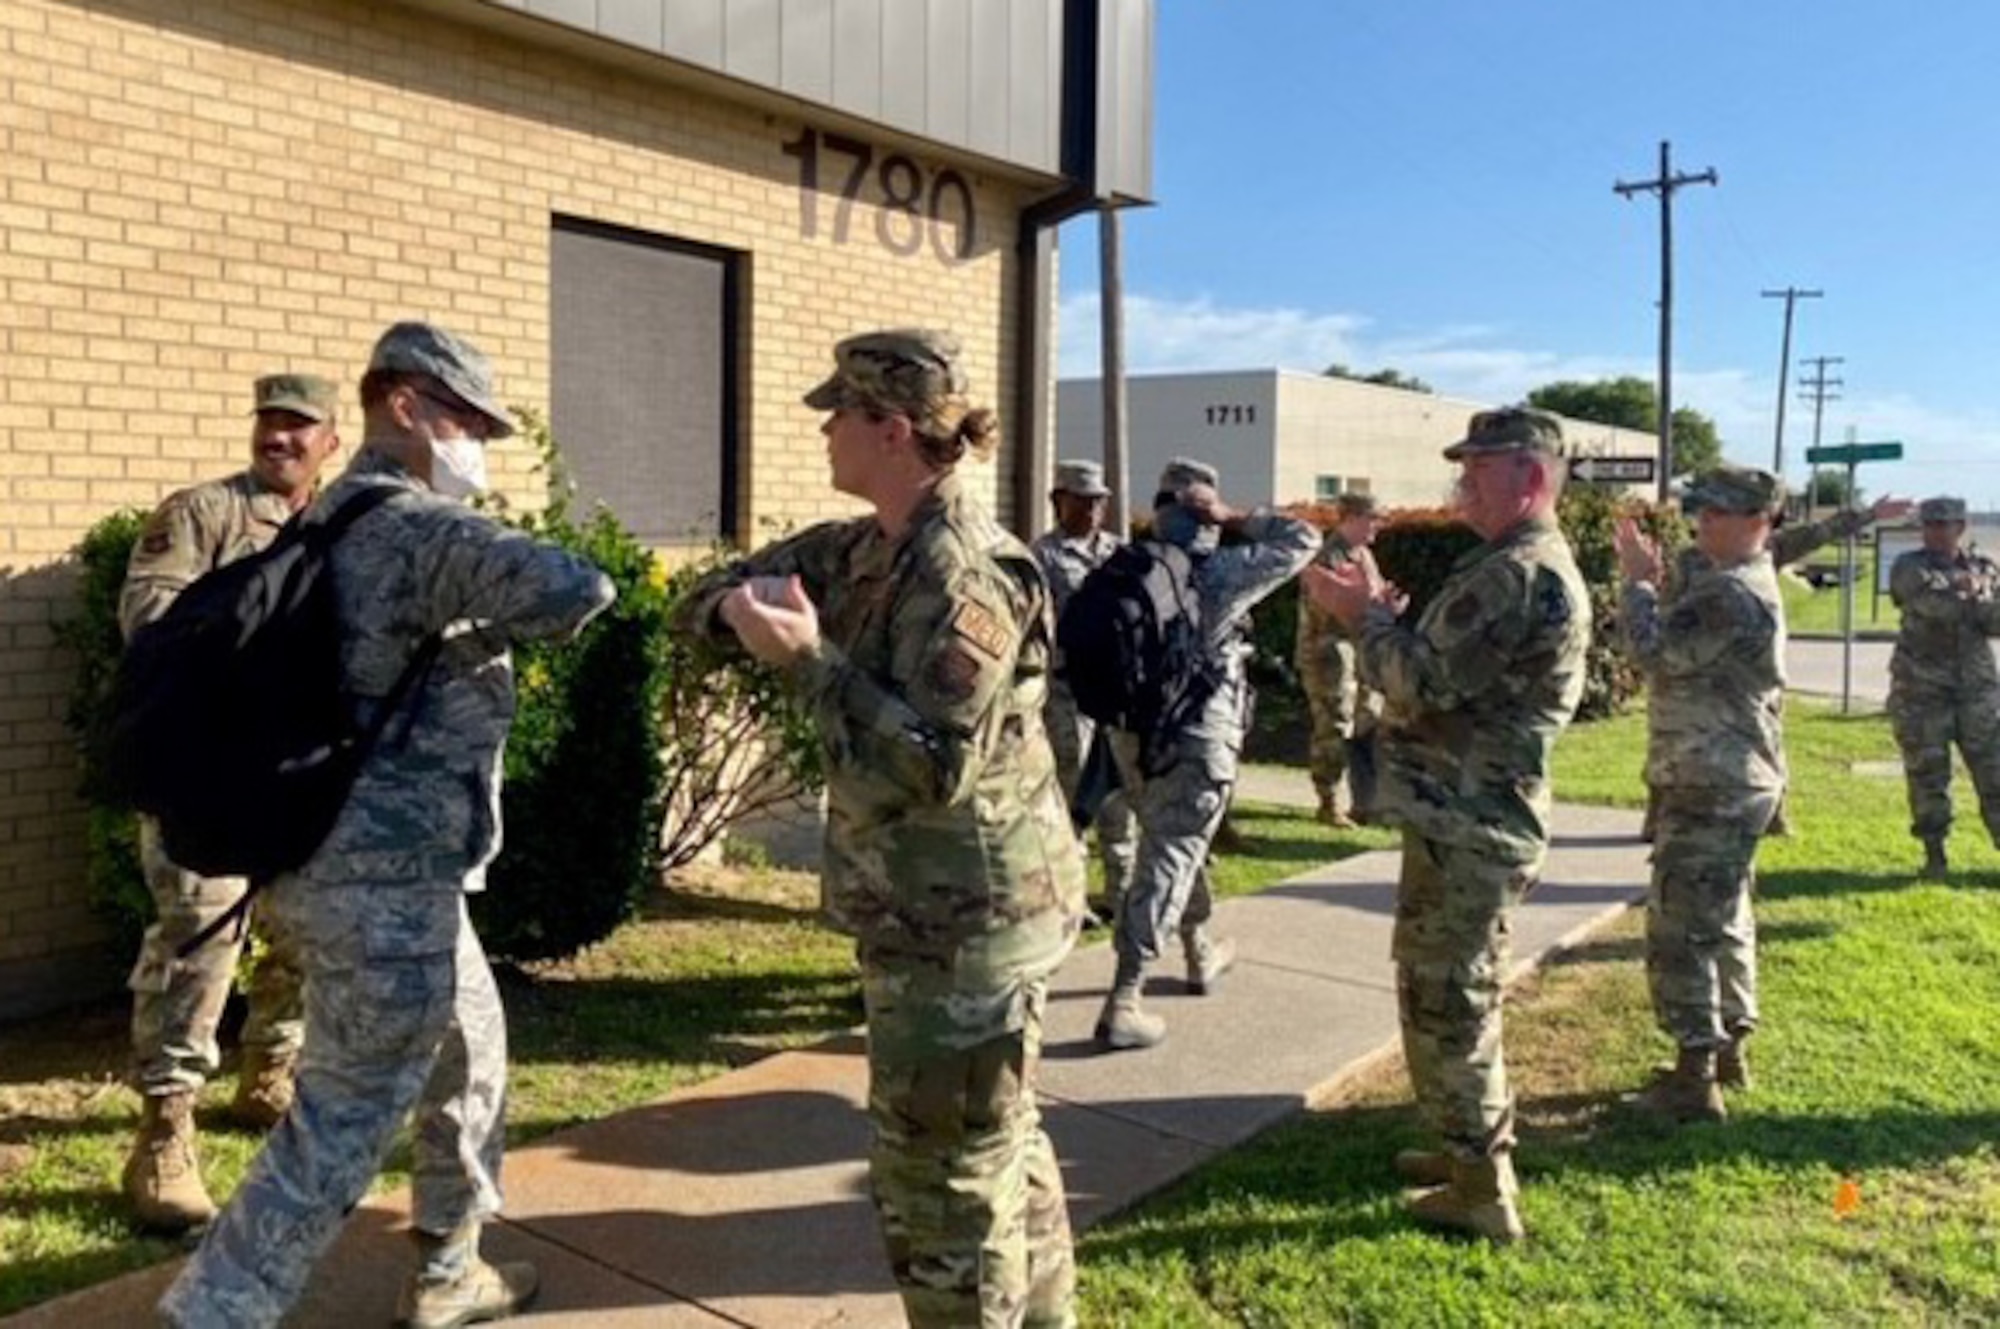 Airmen cheer on 301st Medical Squadron personnel as they prepare to depart U.S. Naval Air Station Joint Reserve Base, Fort Worth, Texas, in support of the nation’s COVID-19 response on April 22, 2020. This deployment is part of a larger mobilization package of more than 770 Air Force Reservists from across the nation who are taking care of Americans fighting COVID-19. (U.S. Air Force photo by Capt. Jessica Gross)